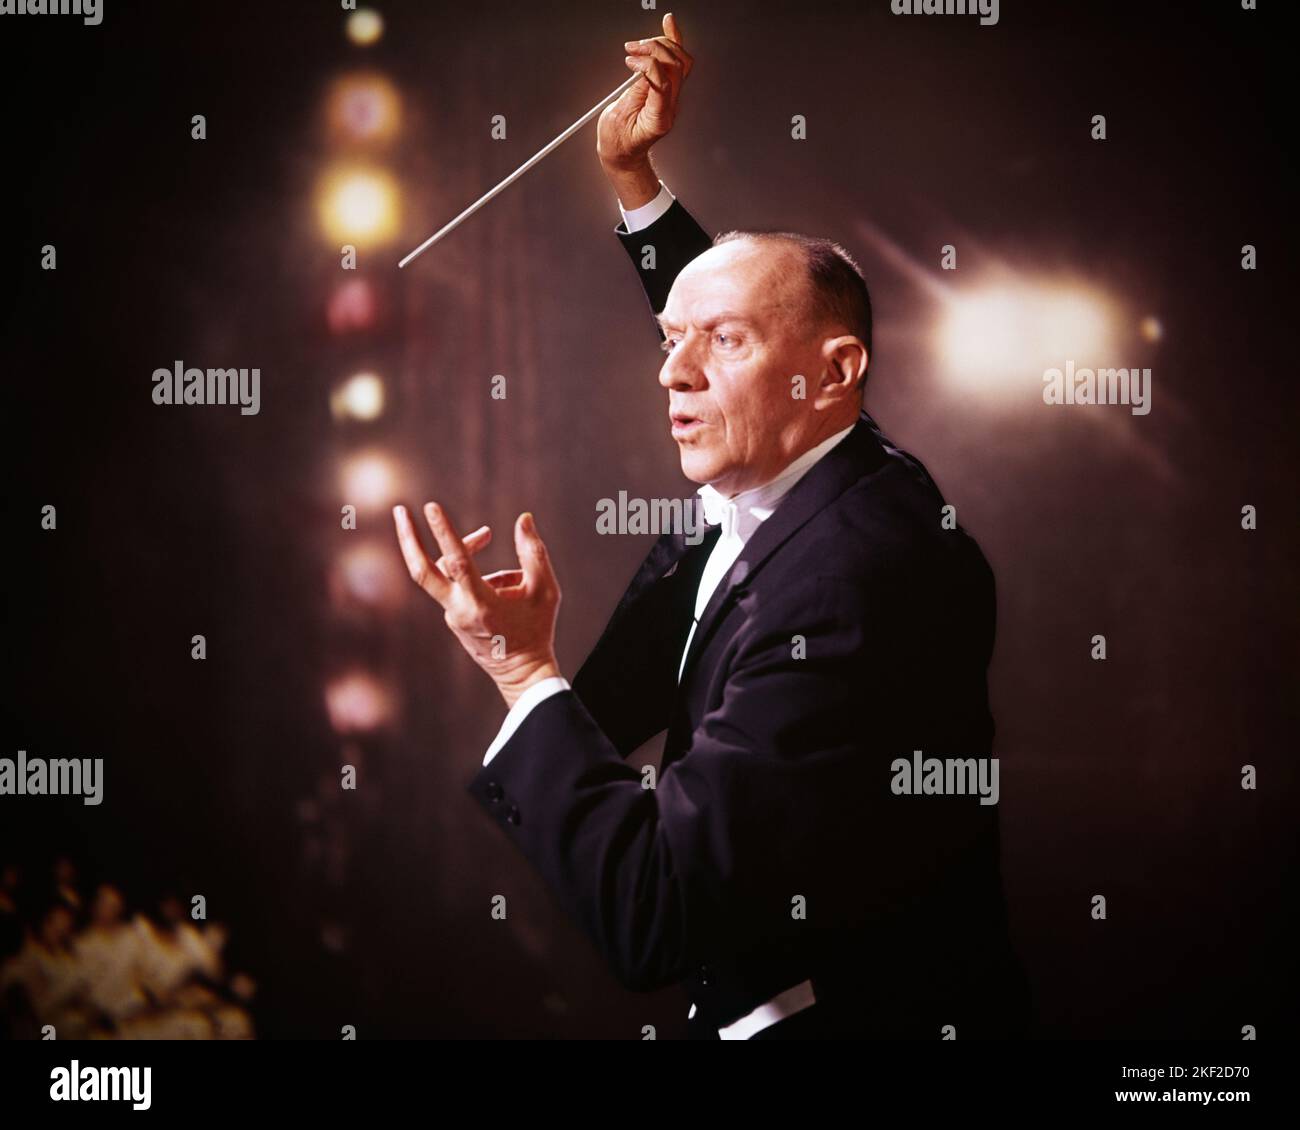 1970s MIDDLE-AGED MAN ORCHESTRA CONDUCTOR CONDUCTING A SYMPHONY WEARING A TUXEDO BRIGHT LIGHTS BEHIND HIM DEMONSTRATIVE GESTURES - km1872 HAR001 HARS JOBS STUDIO SHOT COPY SPACE HALF-LENGTH PERSONS INSPIRATION MALES ENTERTAINMENT SPIRITUALITY MIDDLE-AGED MIDDLE-AGED MAN GOALS SKILL OCCUPATION SKILLS BRIGHT SYMPHONY AUTHORITY CONDUCTING GESTURES OCCUPATIONS MUSICAL INSTRUMENT CONNECTION CONCEPTUAL STYLISH HIM PASSIONATE CAUCASIAN ETHNICITY DEMONSTRATIVE EXPRESSIVE HAR001 OLD FASHIONED Stock Photo